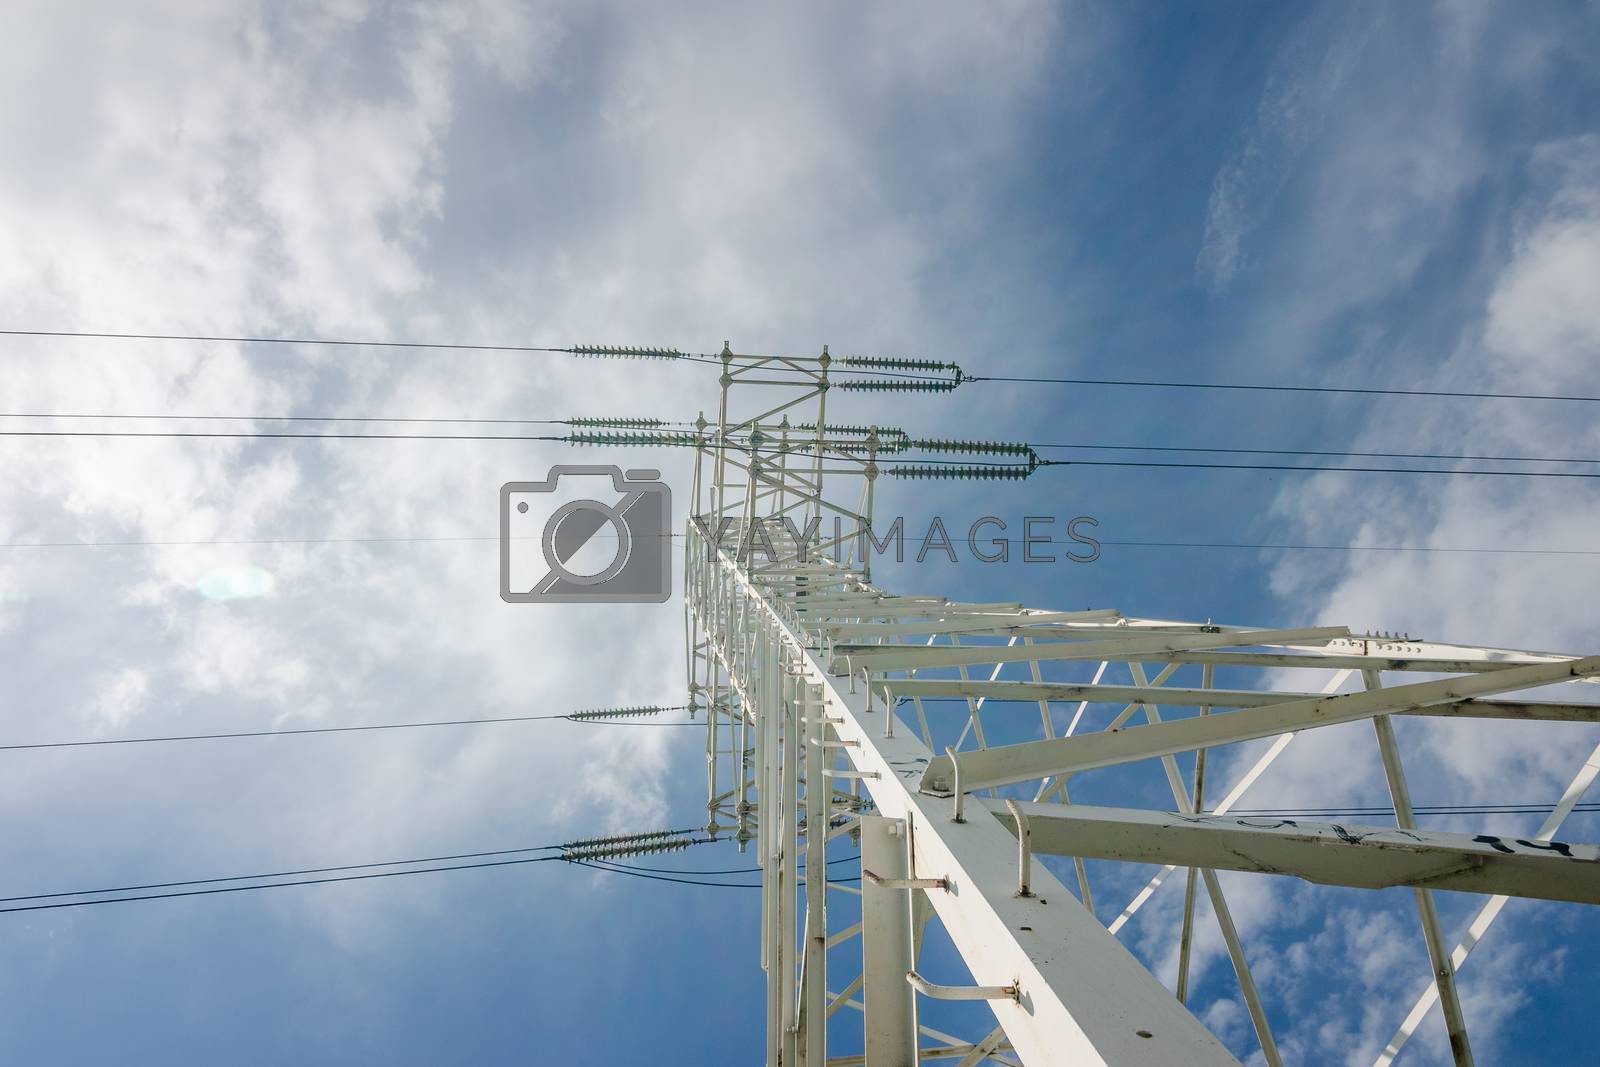 Royalty free image of high voltage transmission line by Andreua